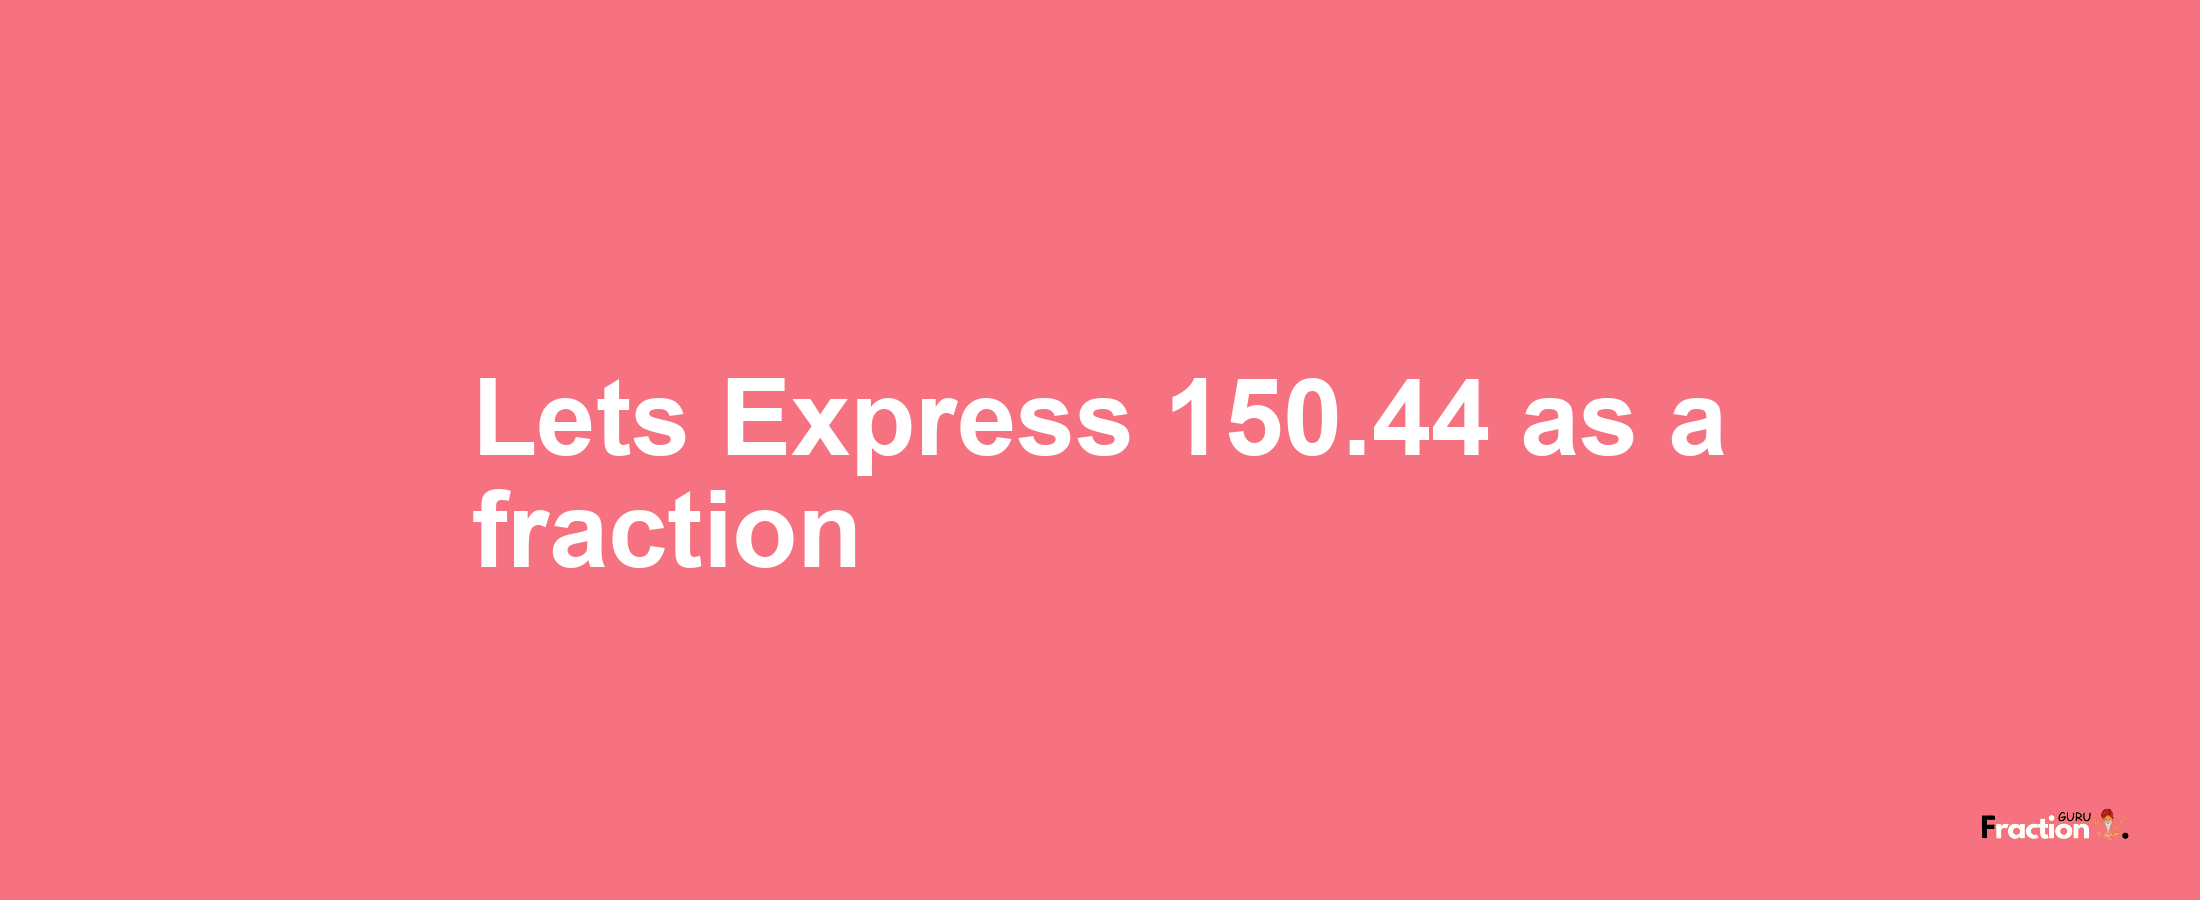 Lets Express 150.44 as afraction